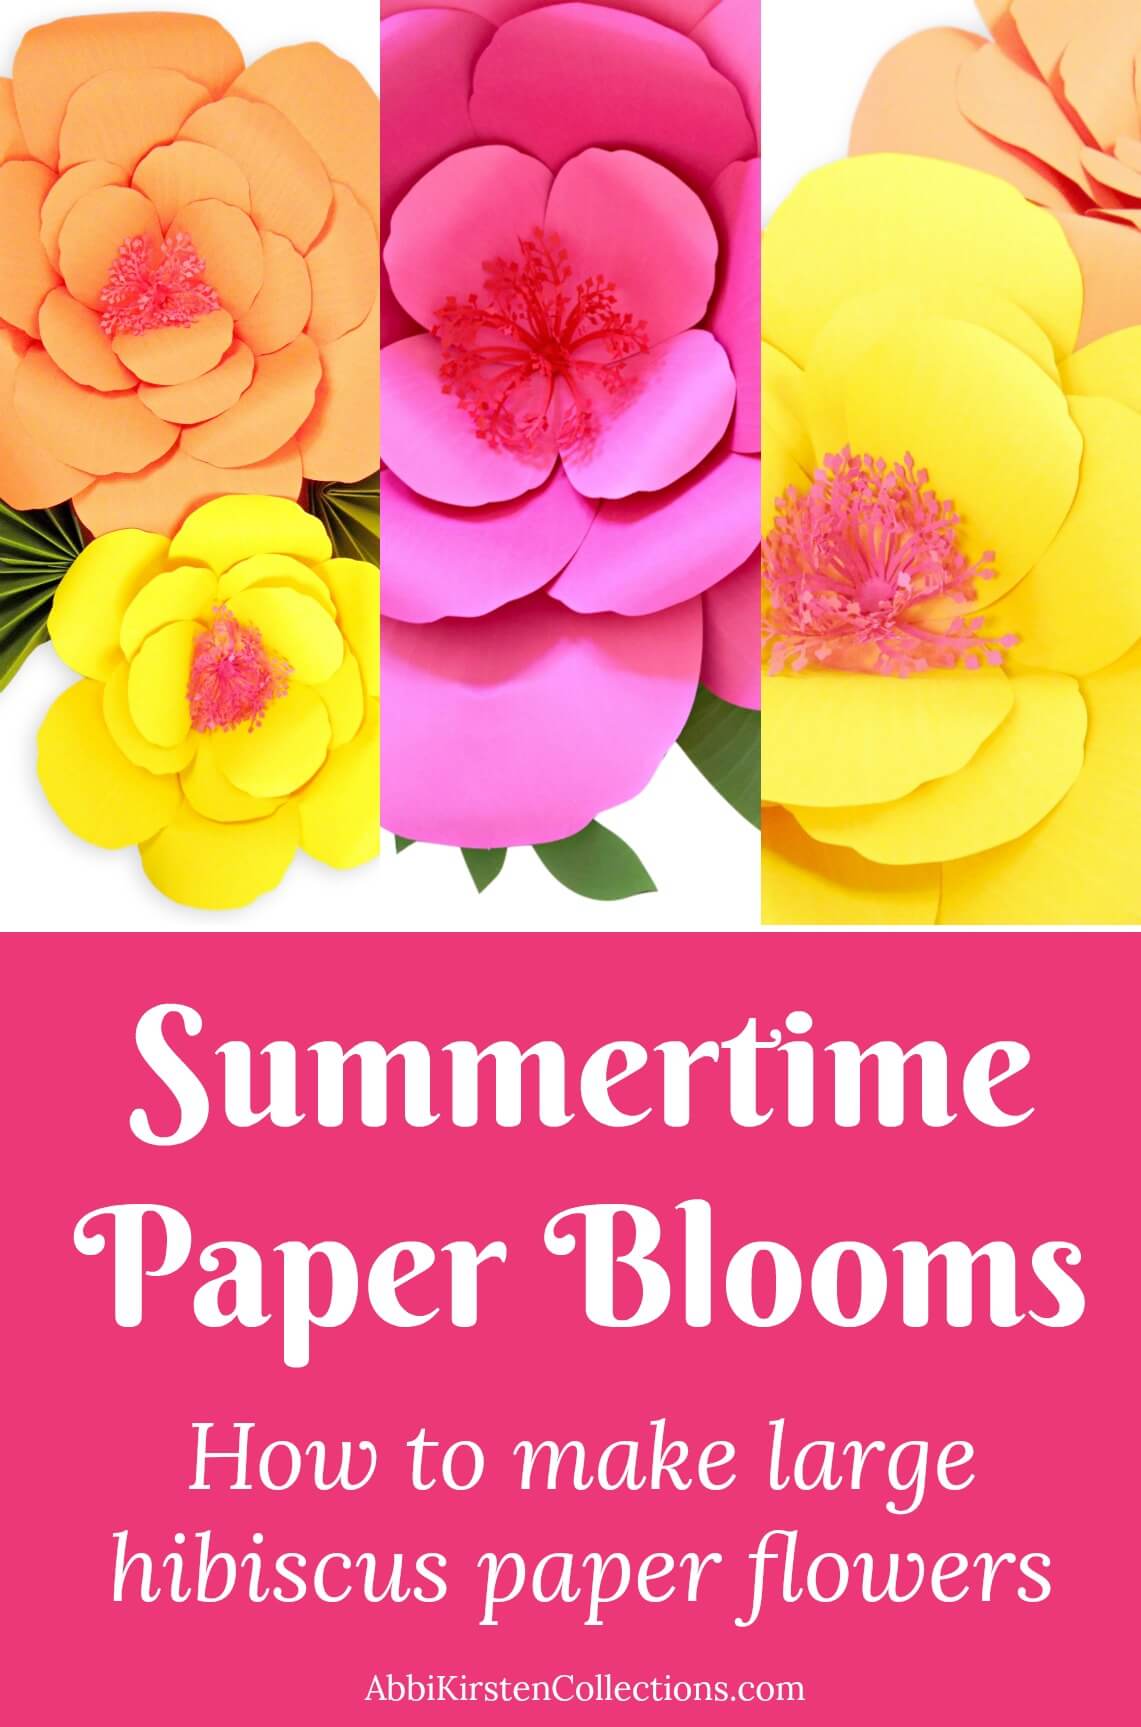 Learn how to make yellow, orange, and pink giant hibiscus paper flowers with this fun and colorful paper flowers. Image text reads “Summertime paper blooms: how to make large hibiscus paper flowers” 